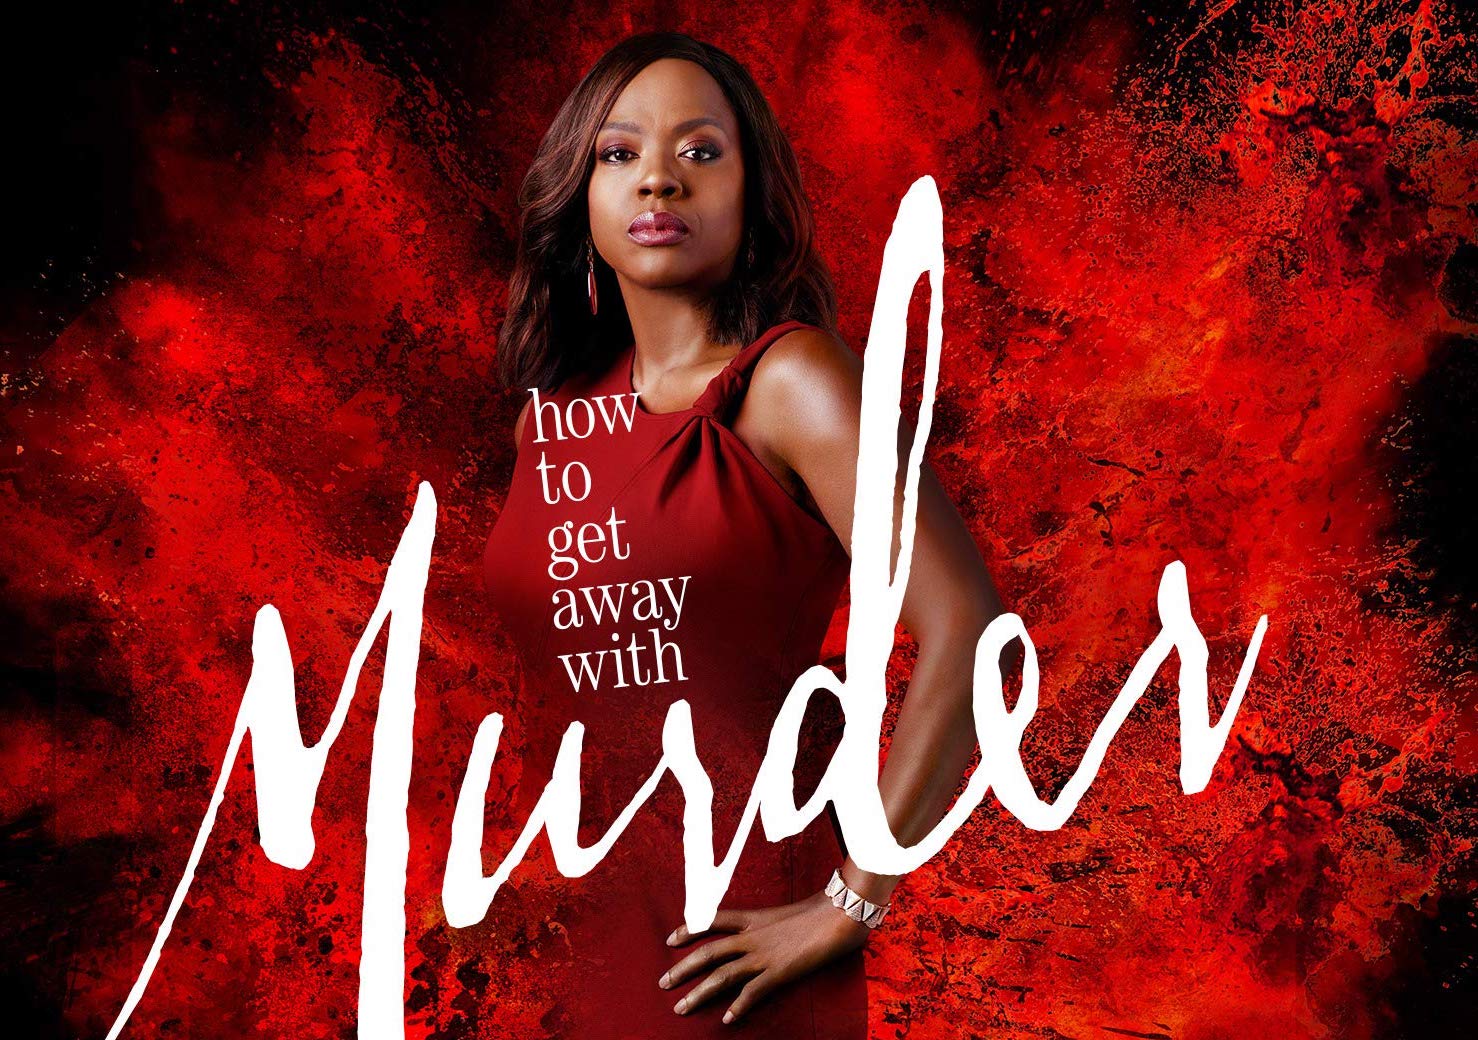 'How To Get Away With Murder' Renewed For 6th Season